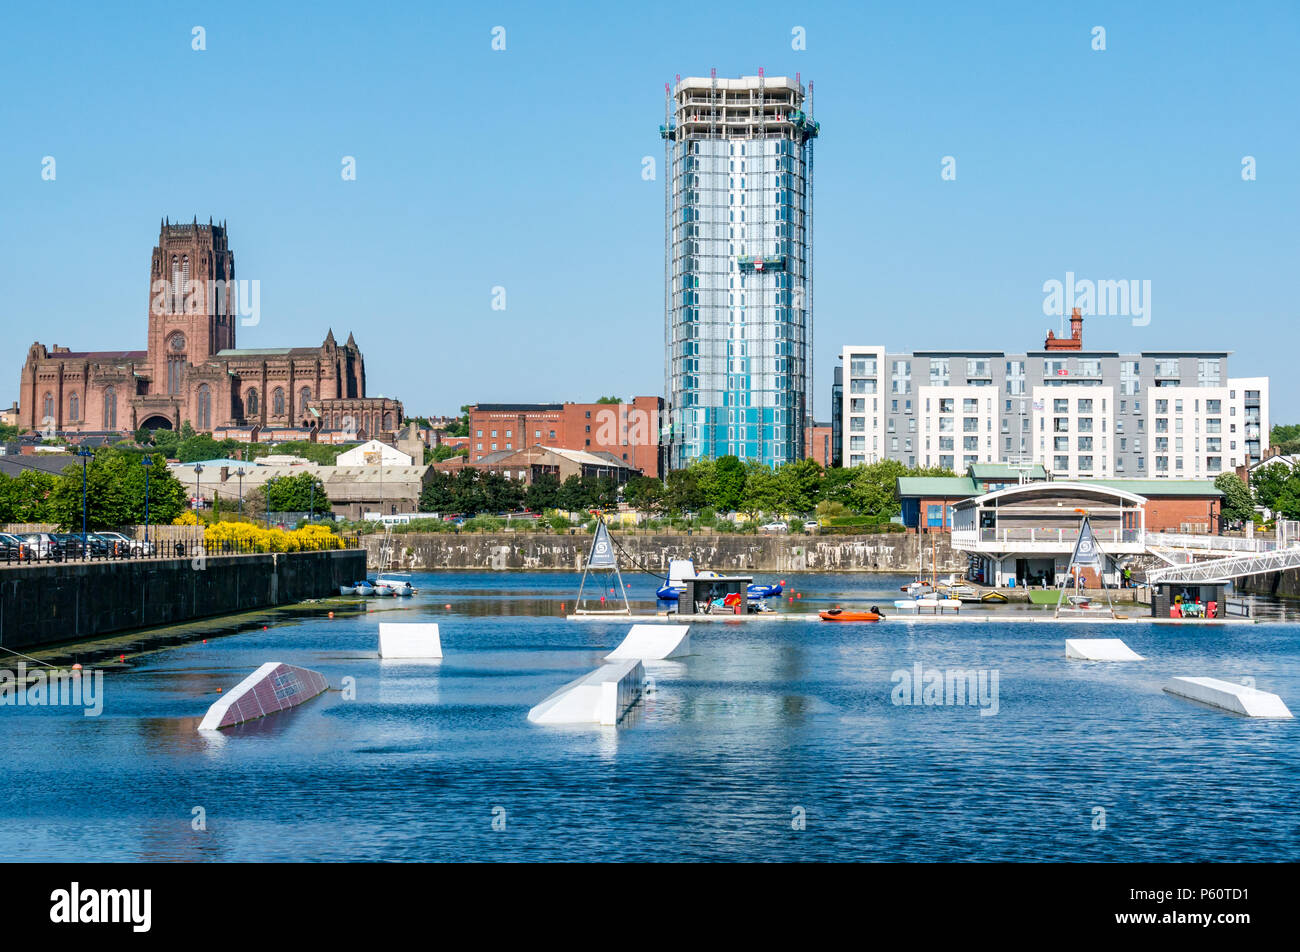 Liverpool Water Sports Centre, Queen's Dock, with Liverpool Cathedral and modern apartment tower, Liverpool, England, UK on sunny day with blue sky Stock Photo